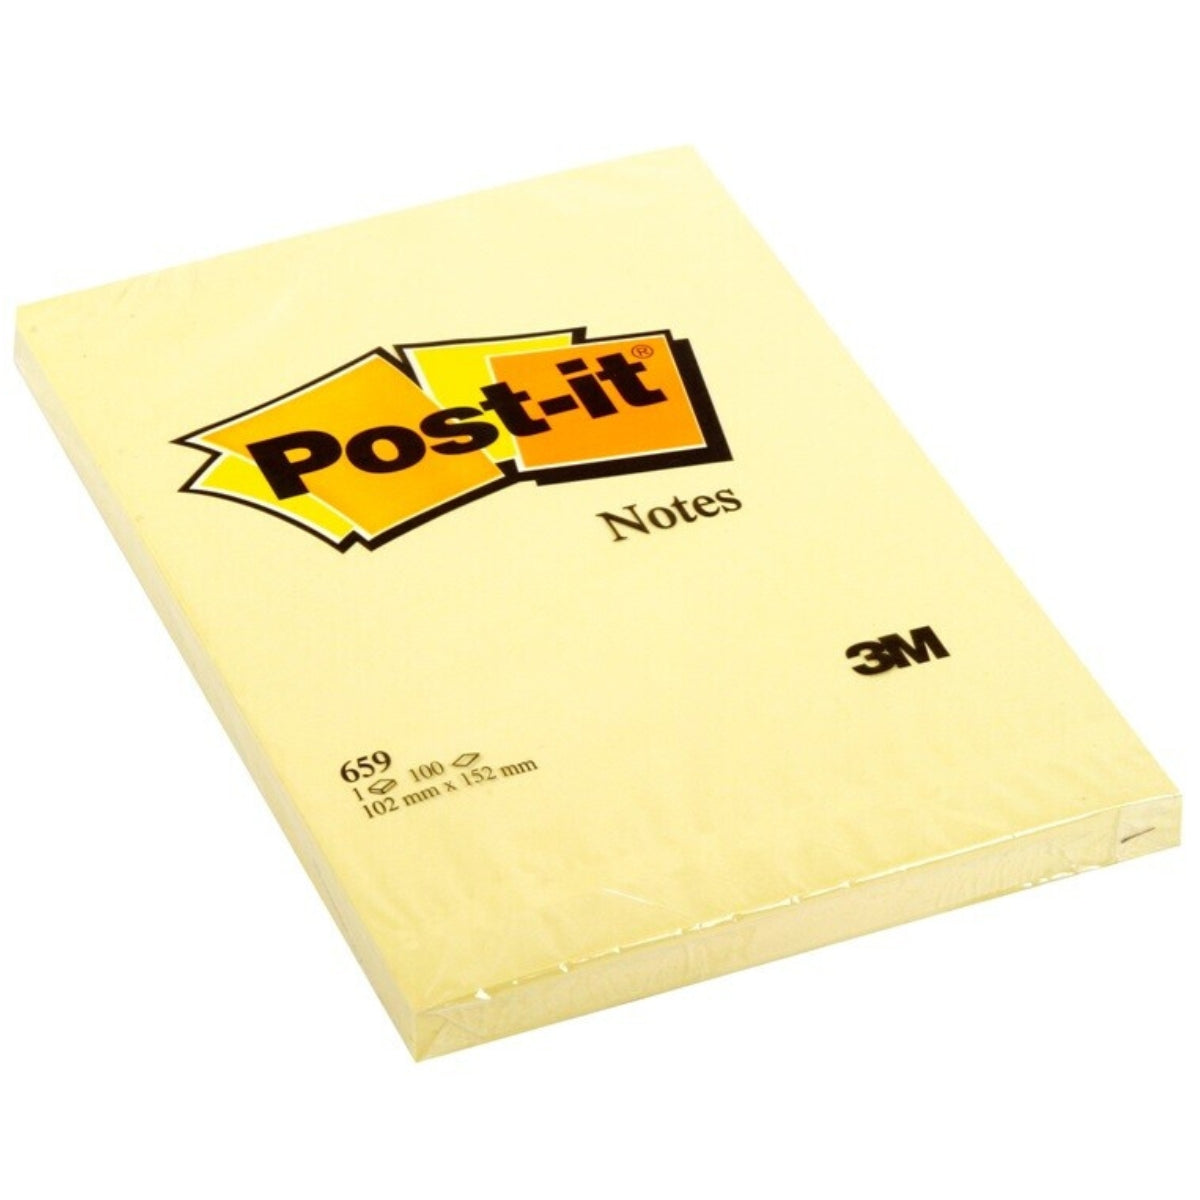 3M Post-it Notes 659, 4x6 inches, Canary Yellow